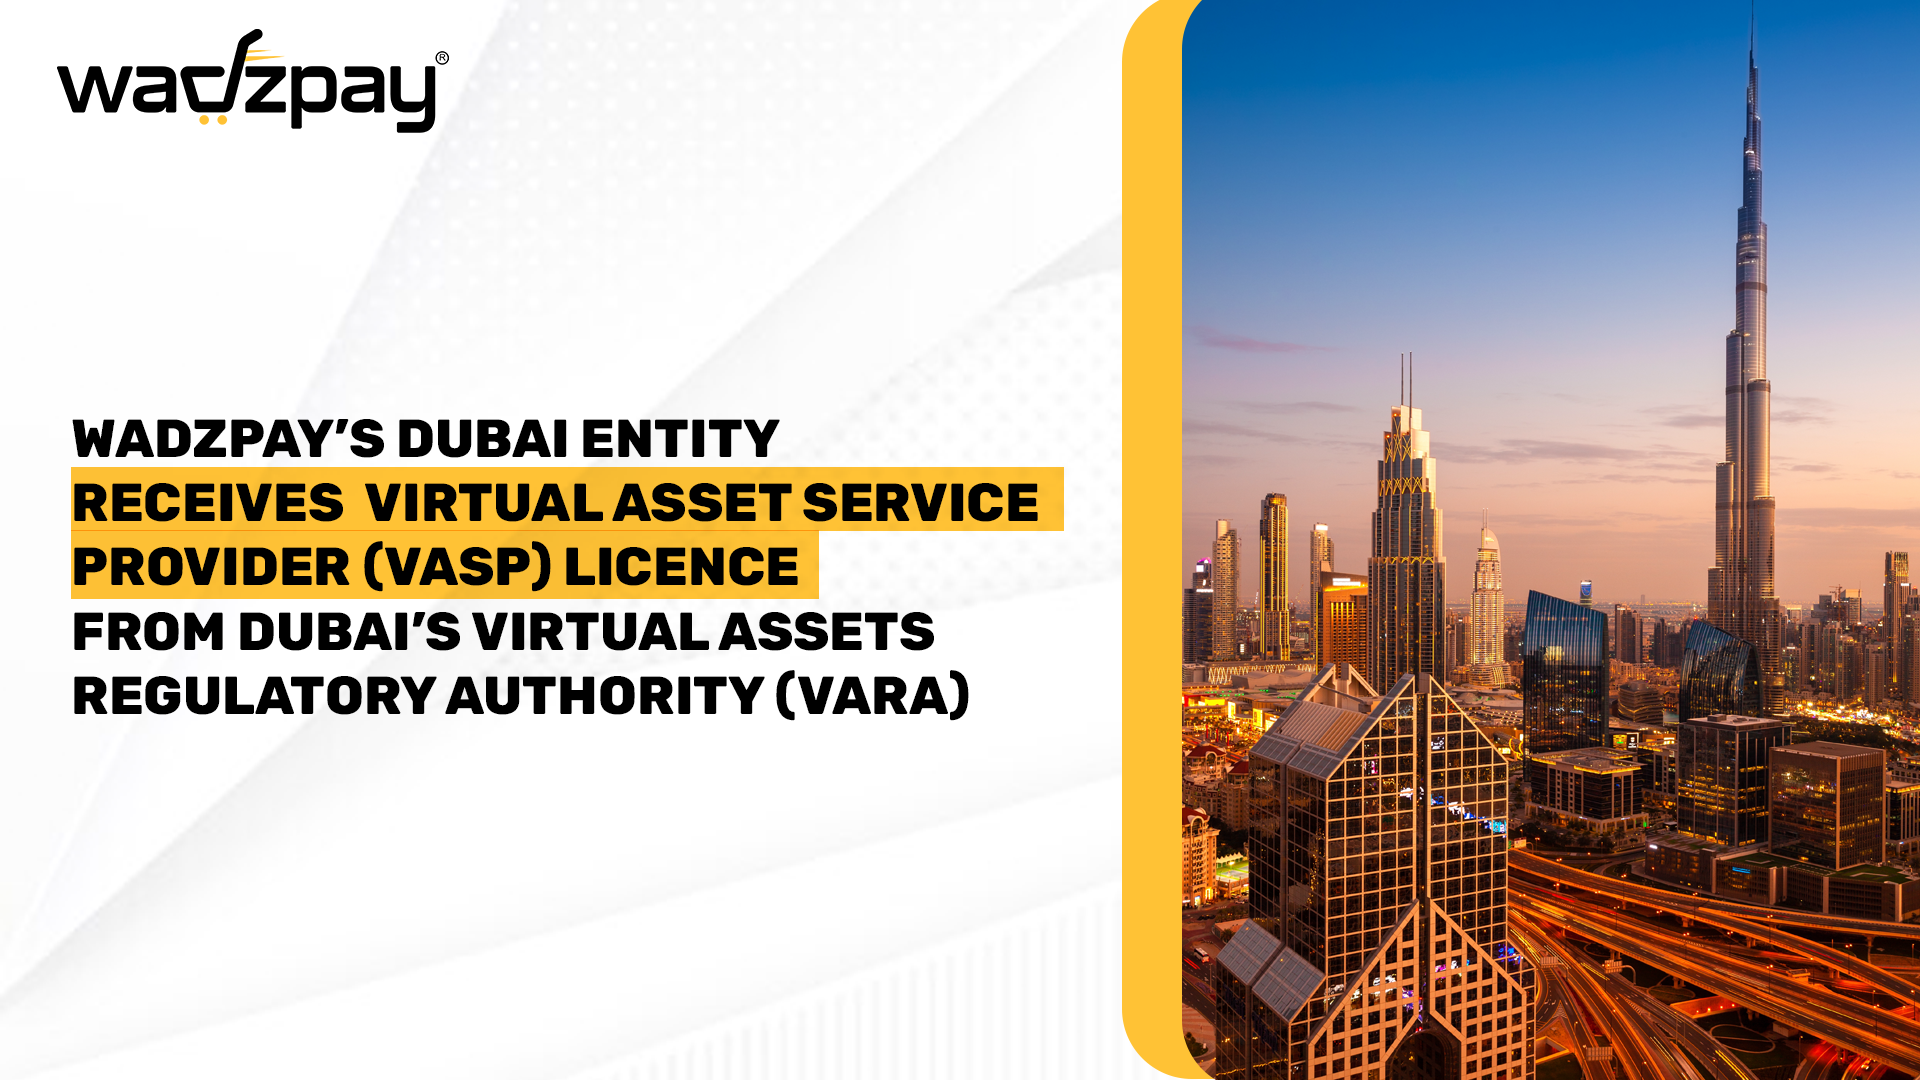 WadzPay’s Dubai Entity Granted VASP Licence. Poised to Revolutionize Virtual Asset Transactions in Middle East.